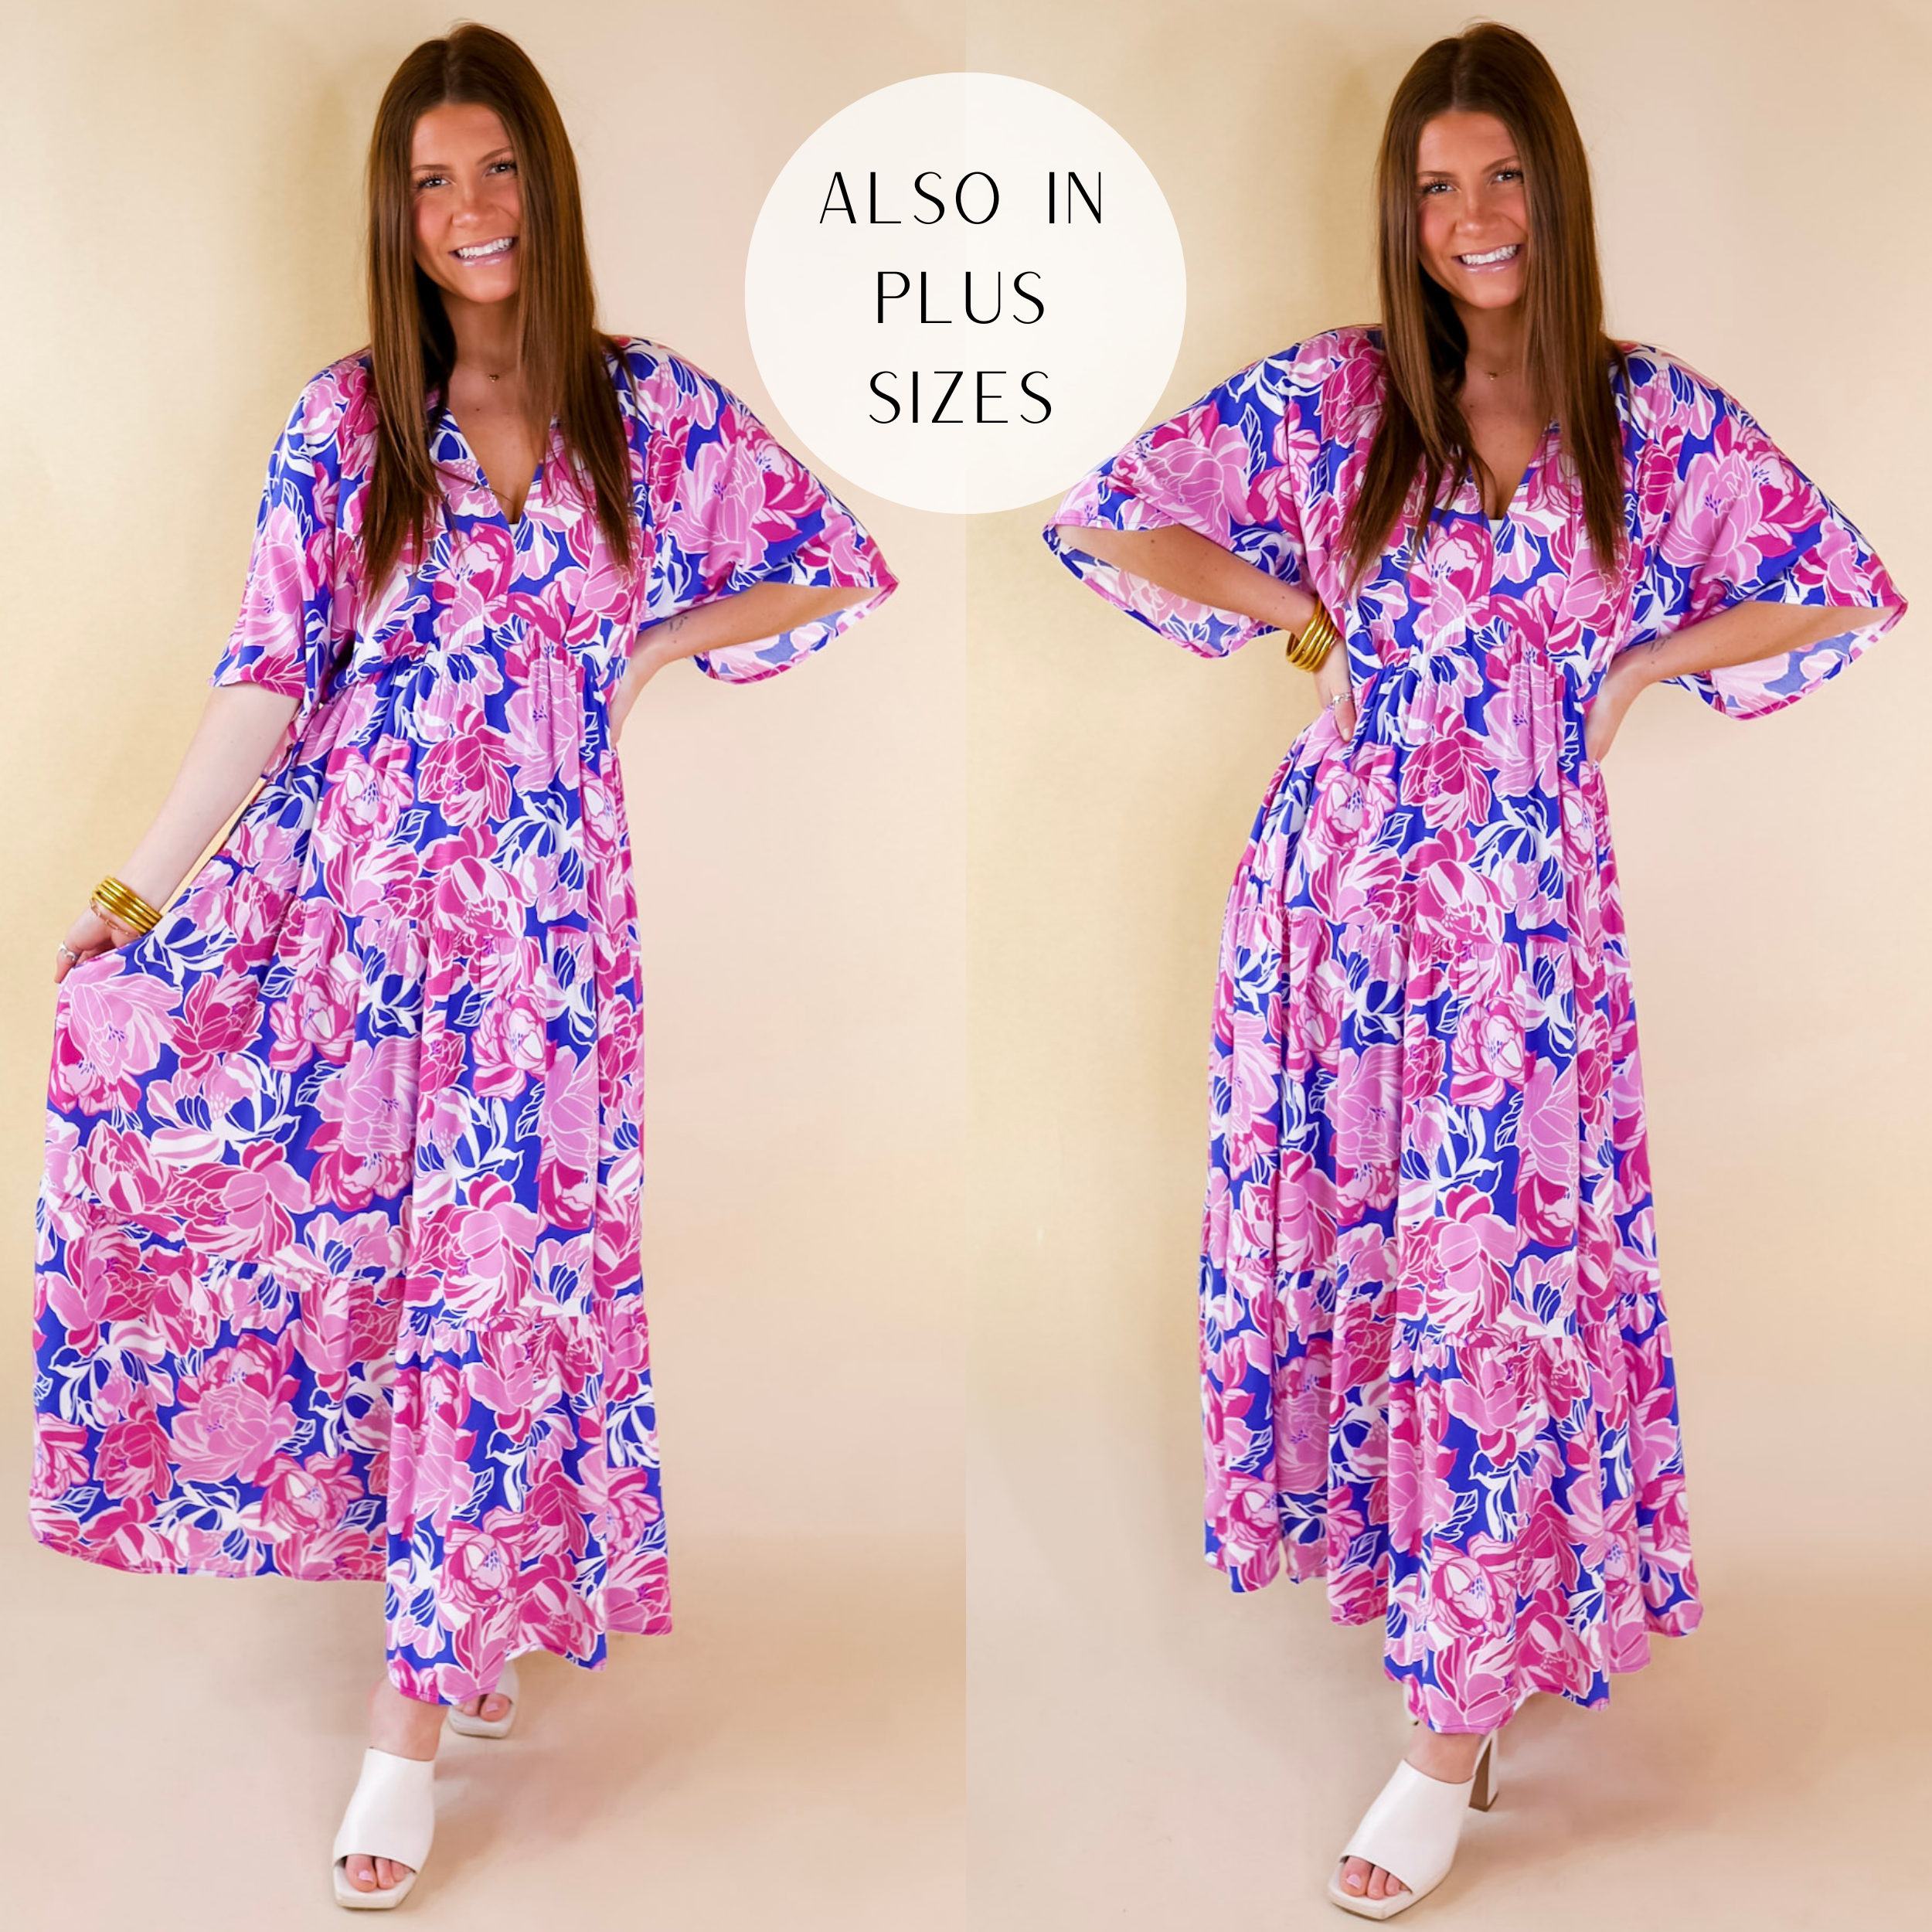 Waving Hello Floral Maxi Dress with V Neckline in Blue and Pink - Giddy Up Glamour Boutique